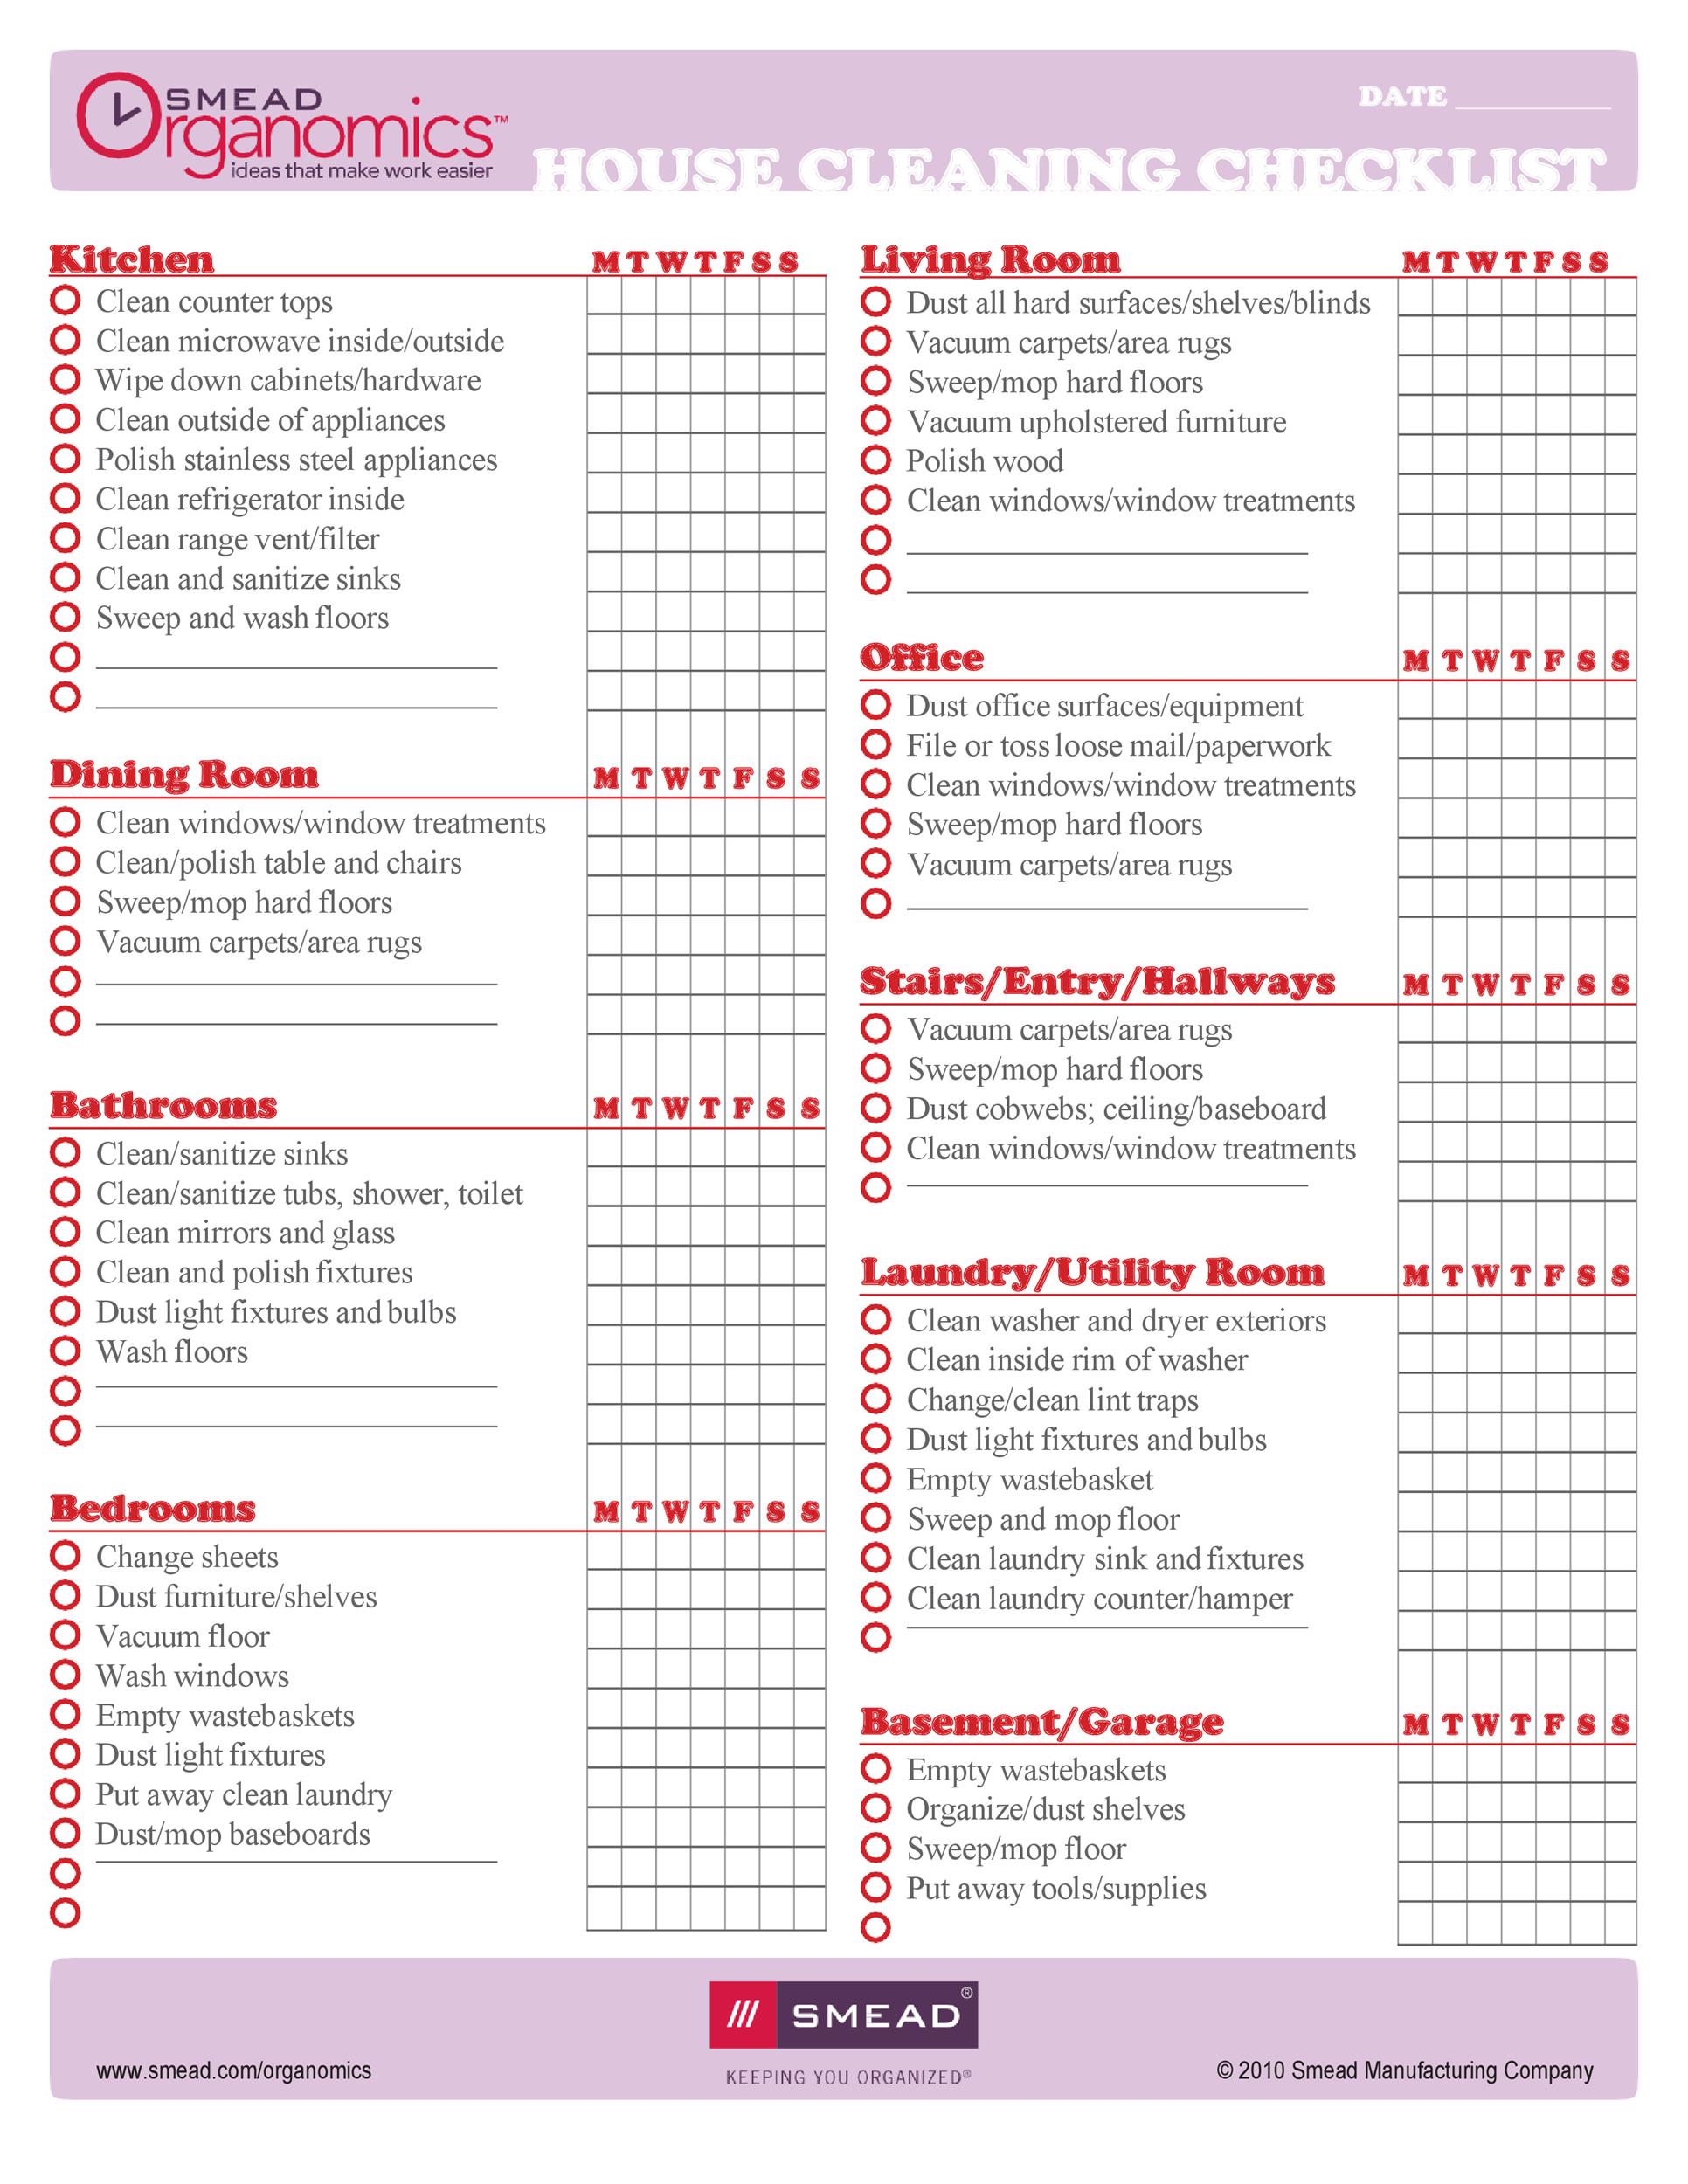 House Cleaning Checklist Image